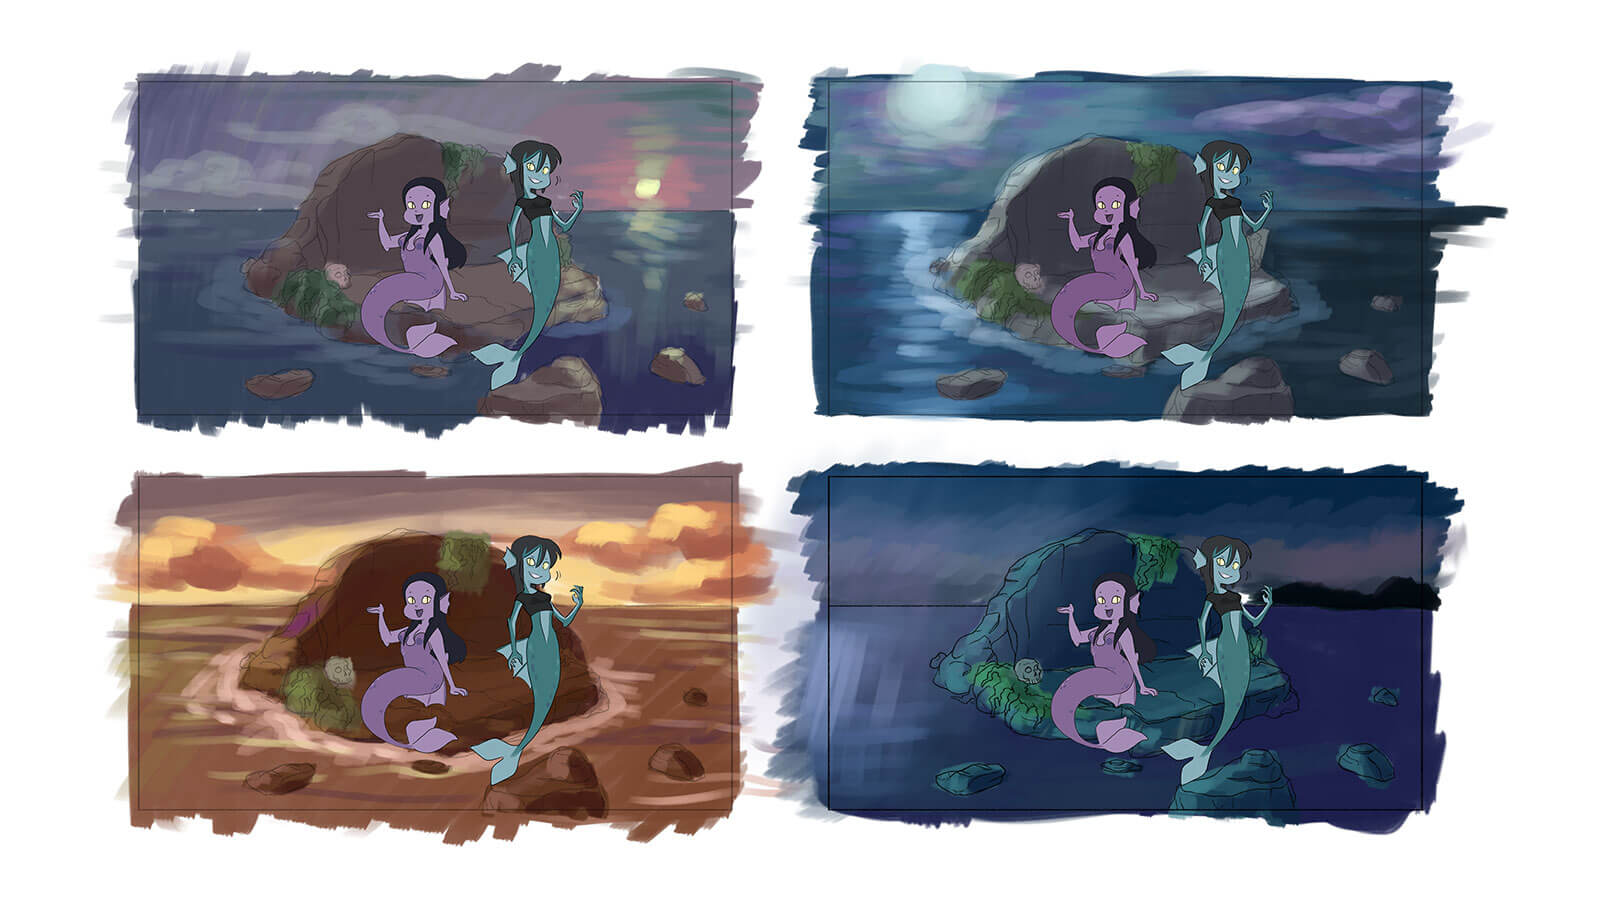 Drawing of two mermaid characters depicted at different times of day